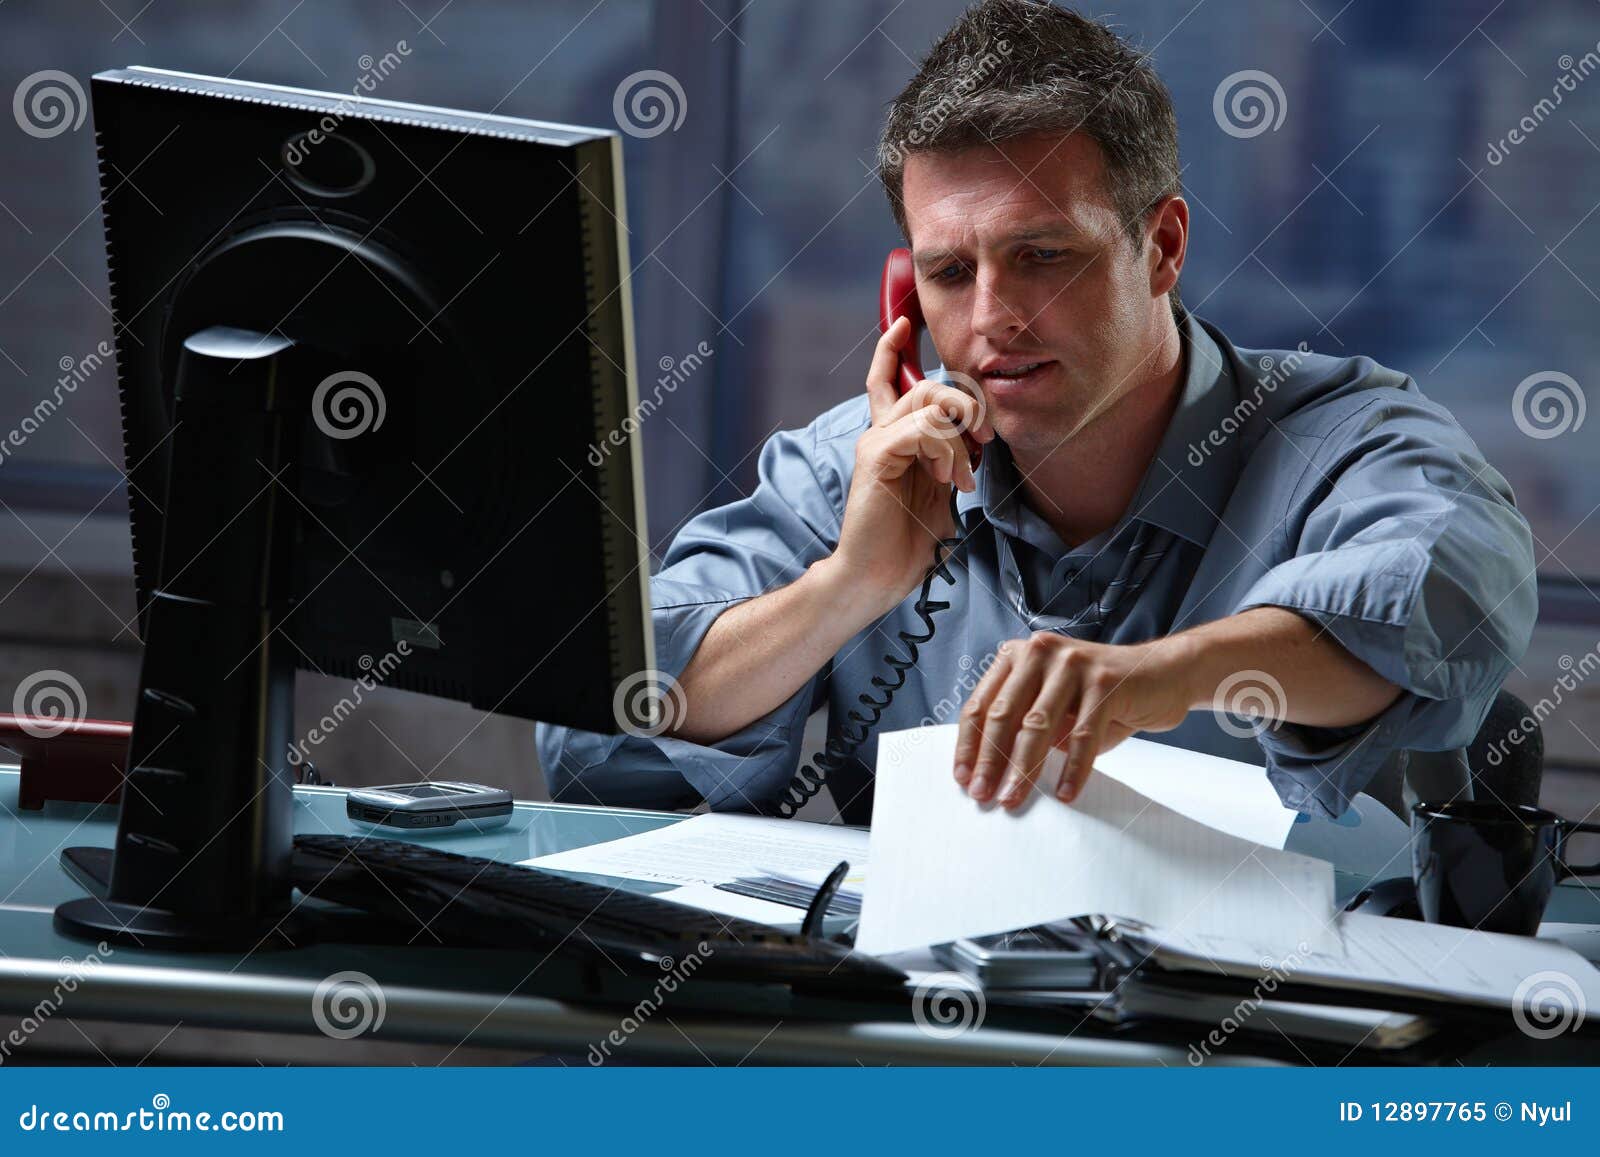 businessman on call in overtime